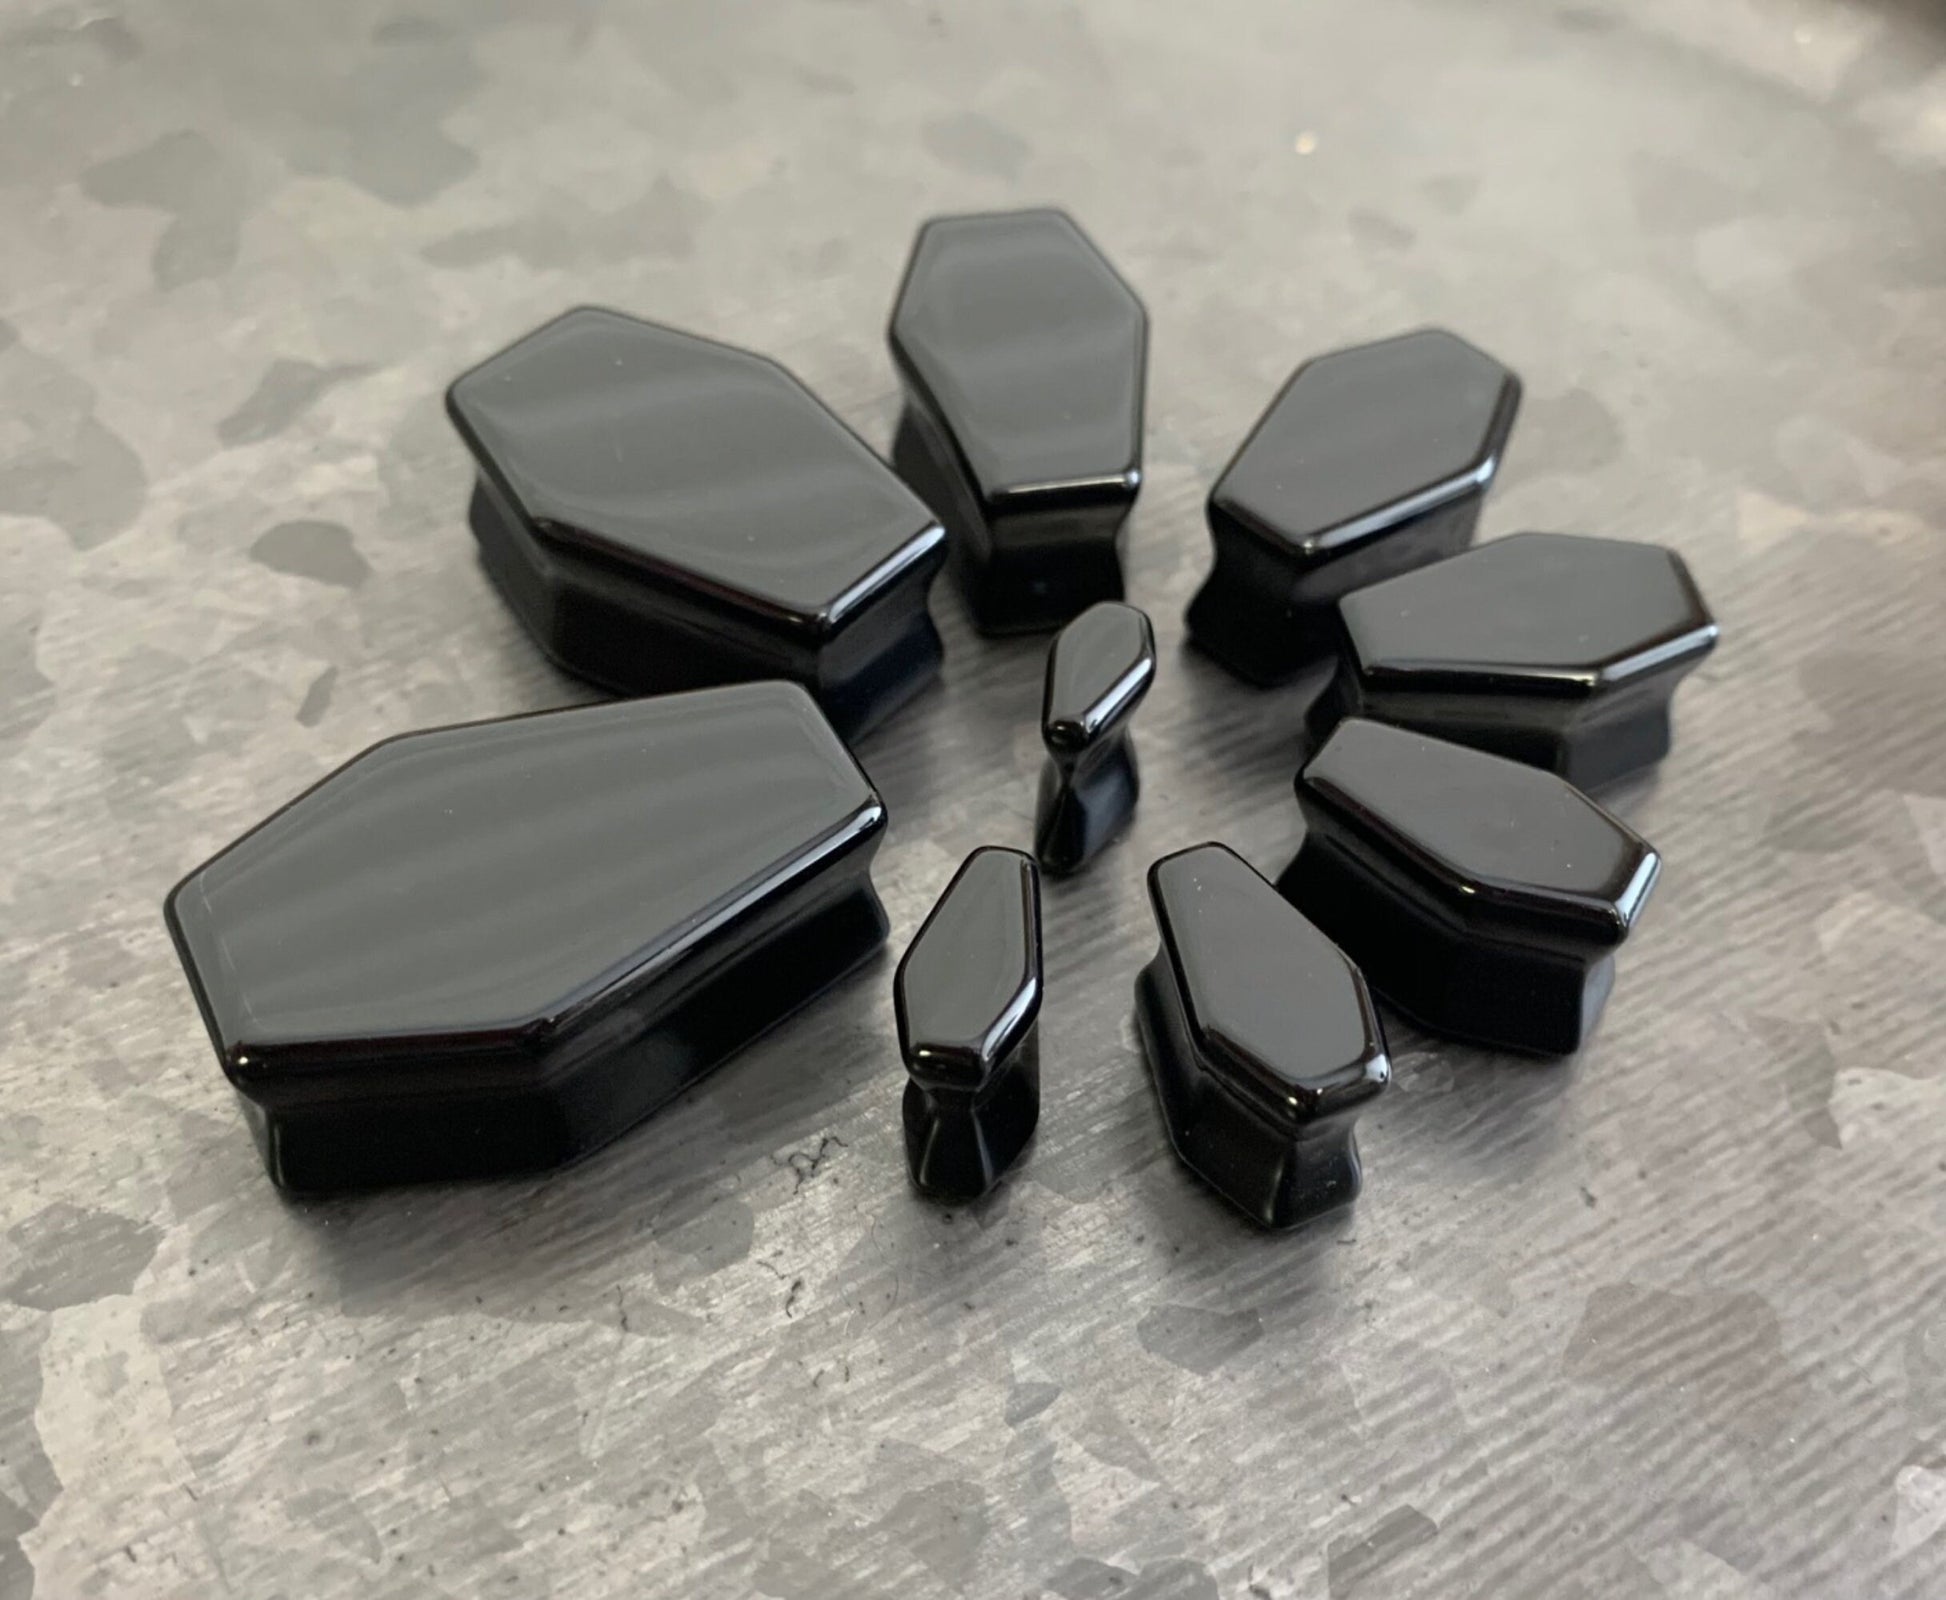 PAIR of Unique Coffin Shaped Organic Black Obsidian Double Flare Stone Plugs - Gauges 2g (6mm) to 1" (25mm) available!